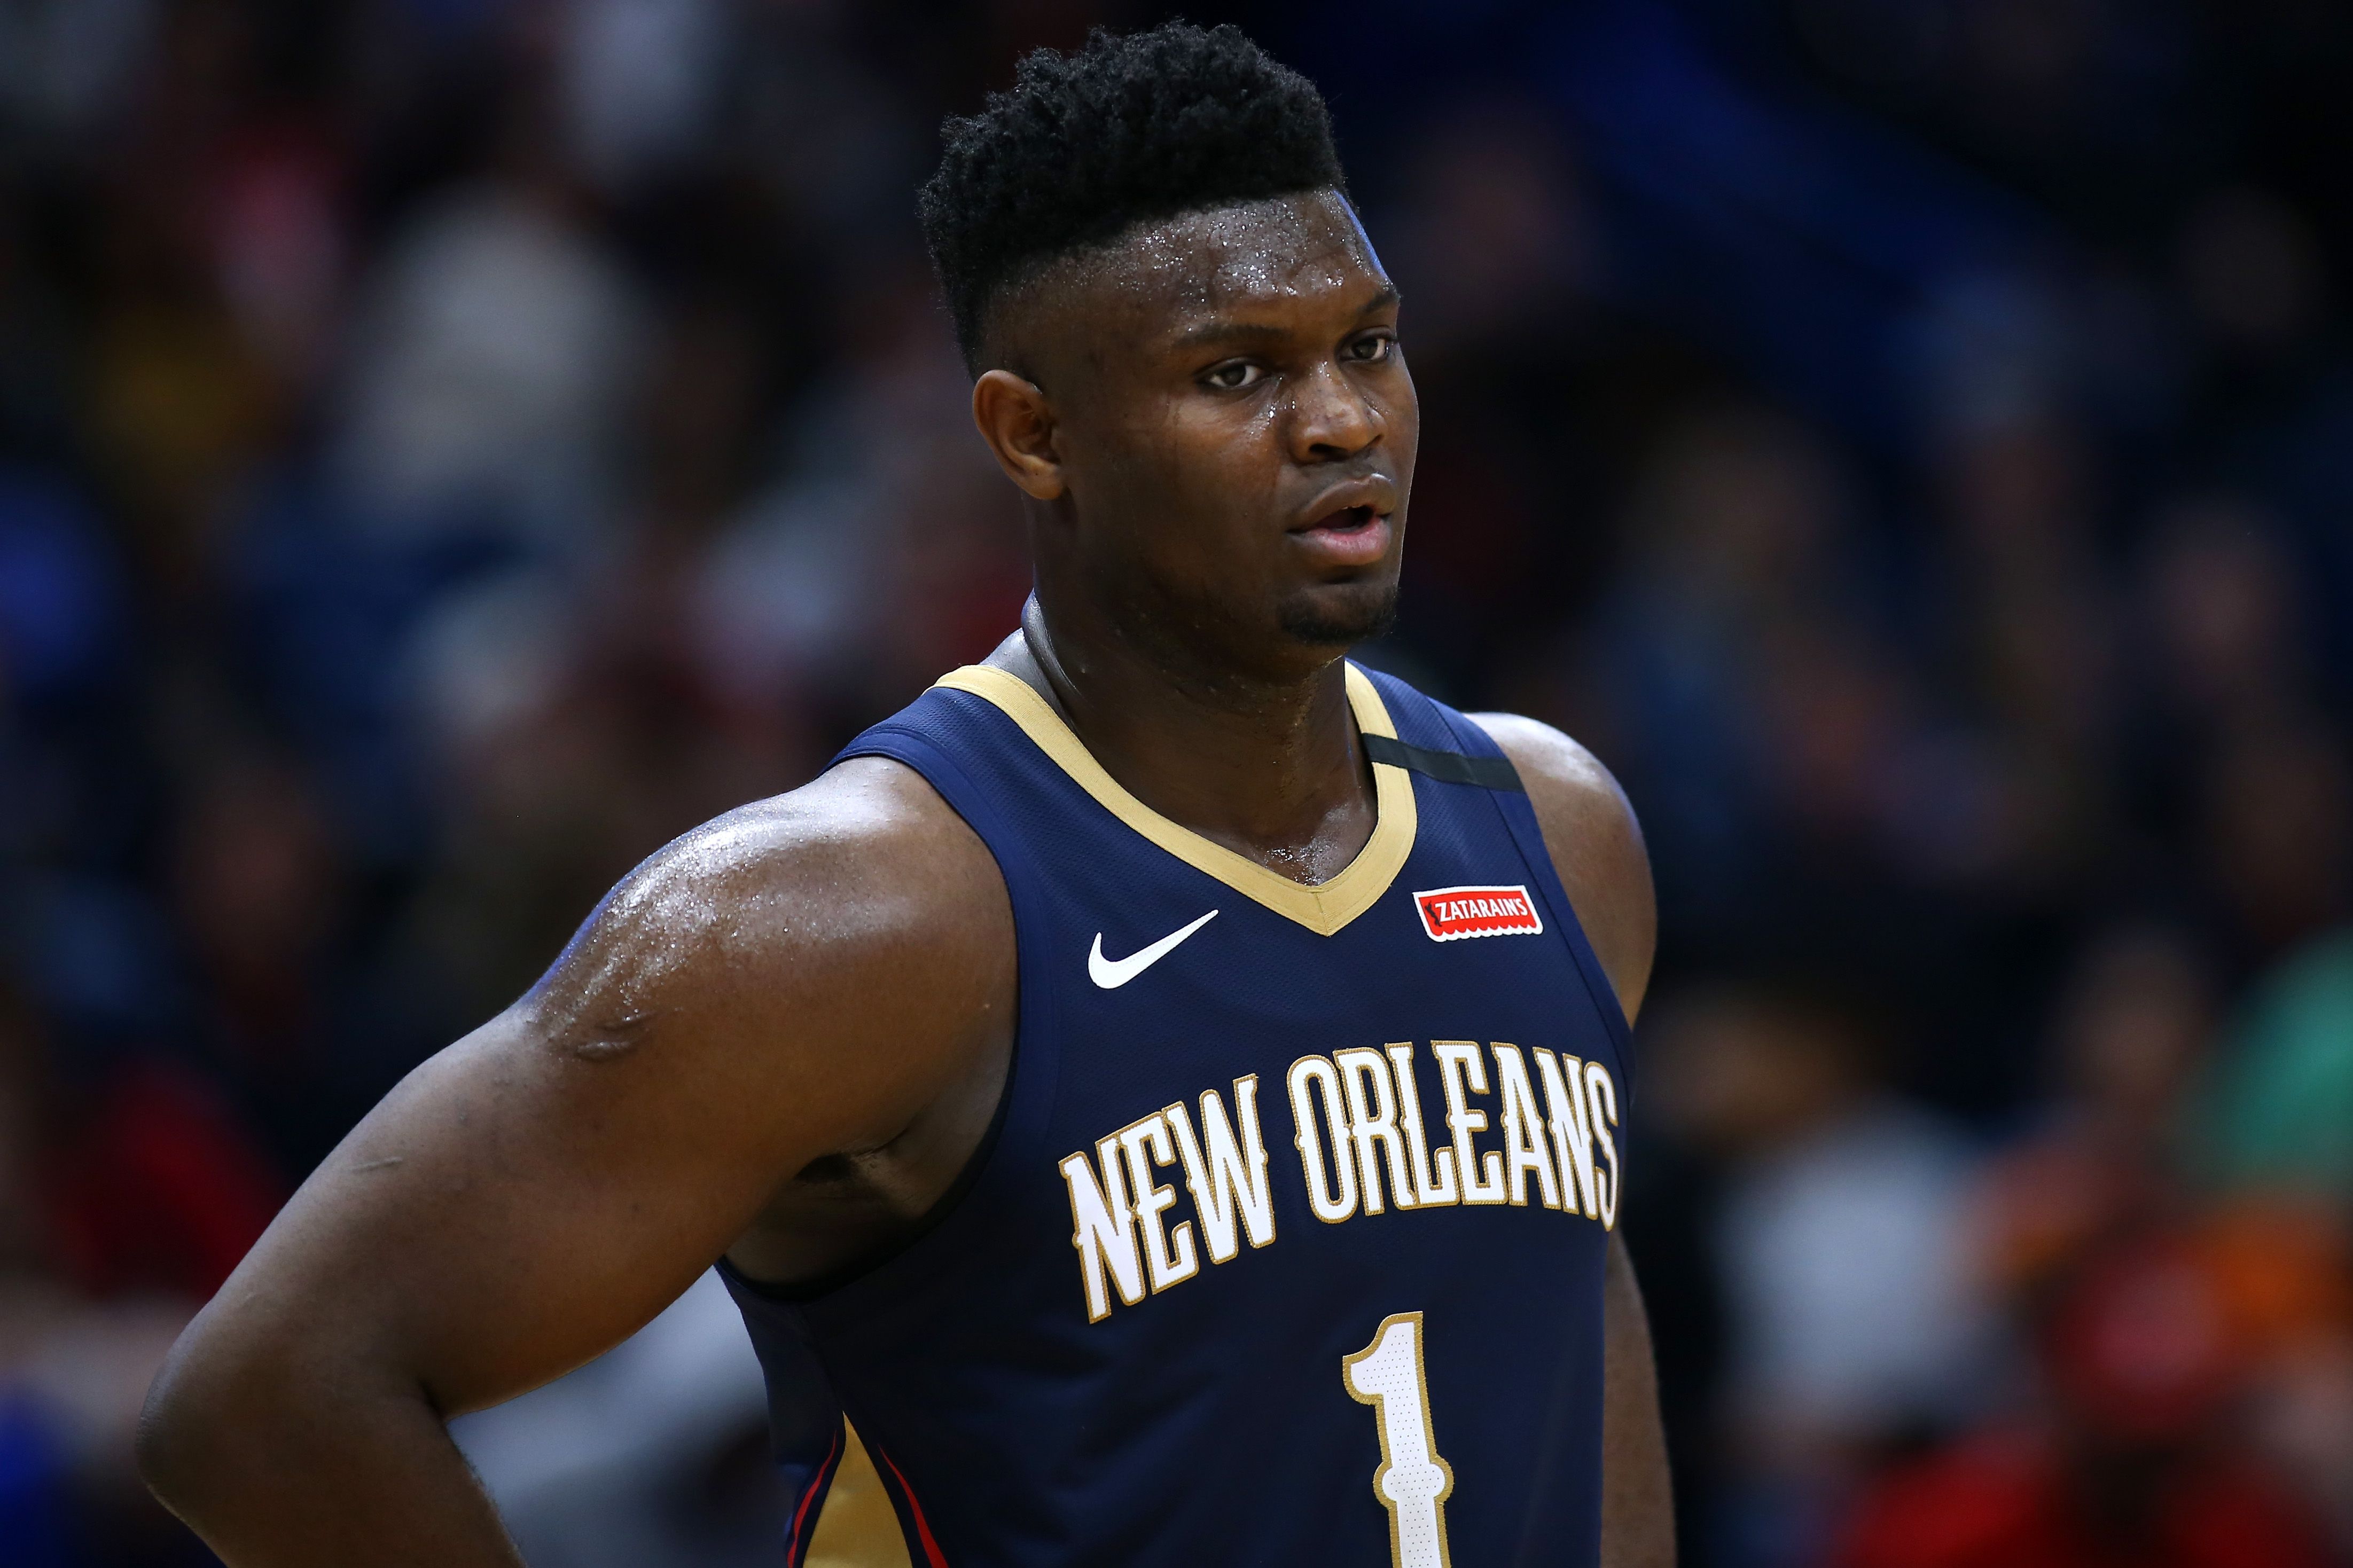 Zion Williamson is being used like a running back by the Pelicans